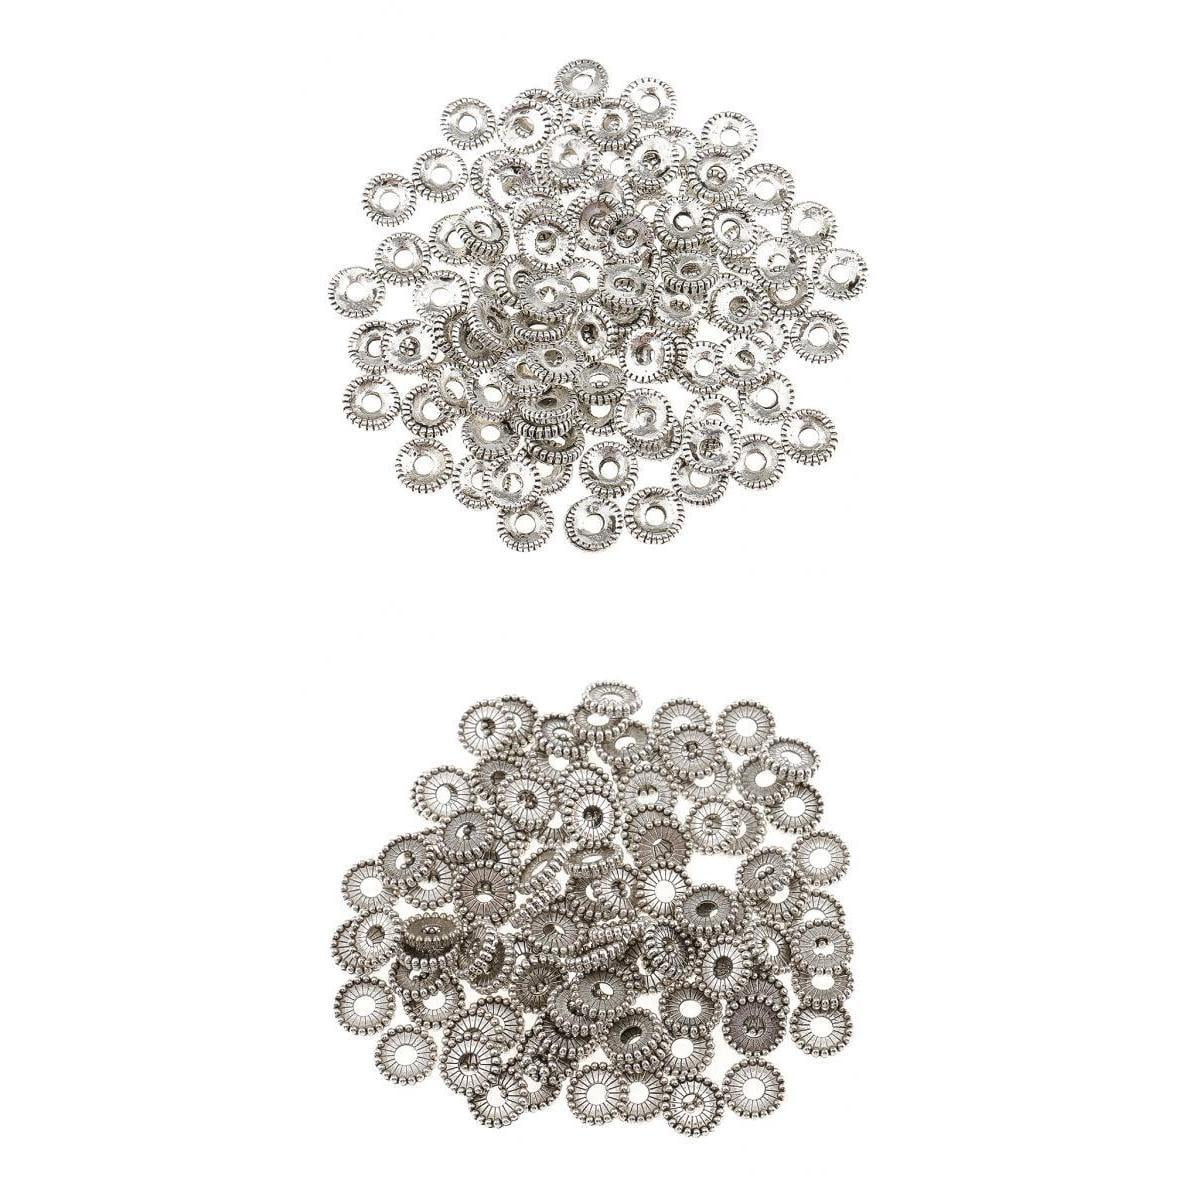 200x Tibetan Silver Spacer Beads Wheel Bead Charms Jewelry Findings 6MM 8MM 